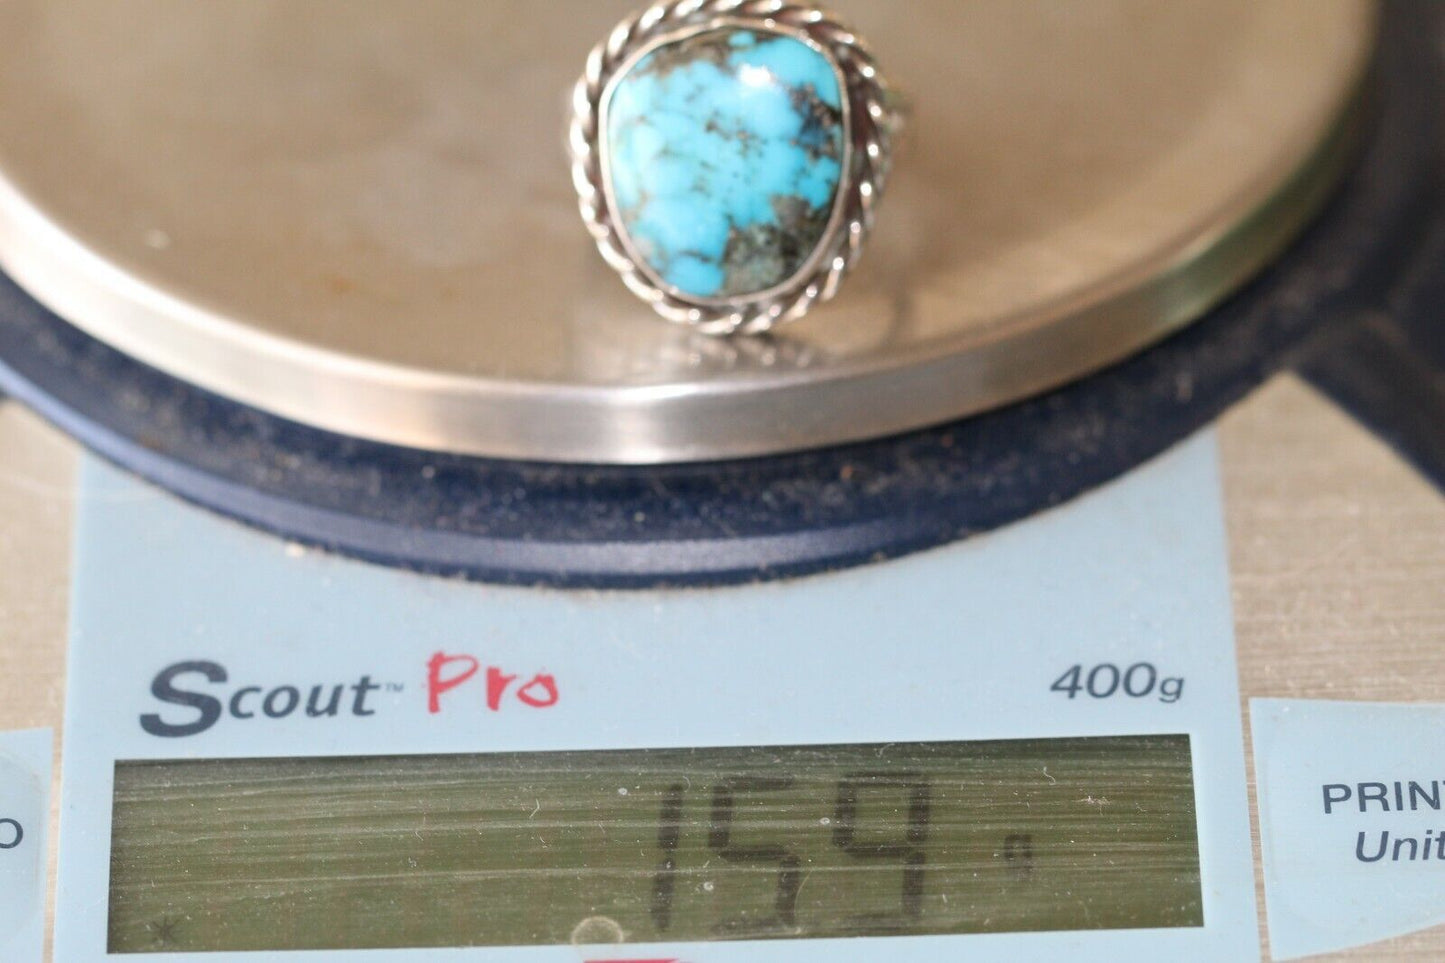 *VINTAGE*  Large Native American Sterling Silver Blue Turquoise Ring  Size 13.5